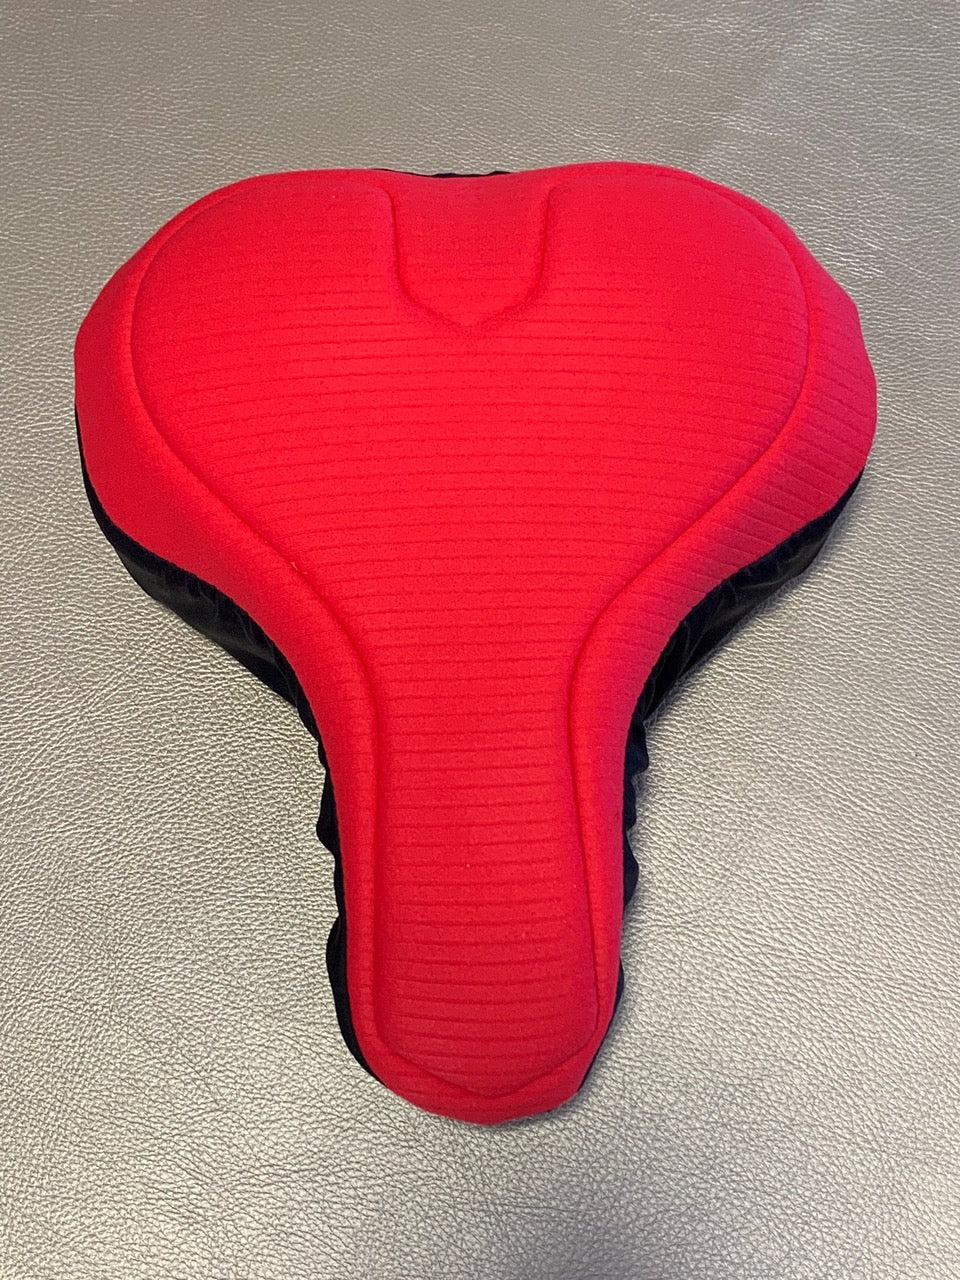 Red_padded_wide_saddle_seat_cover_pedalshed